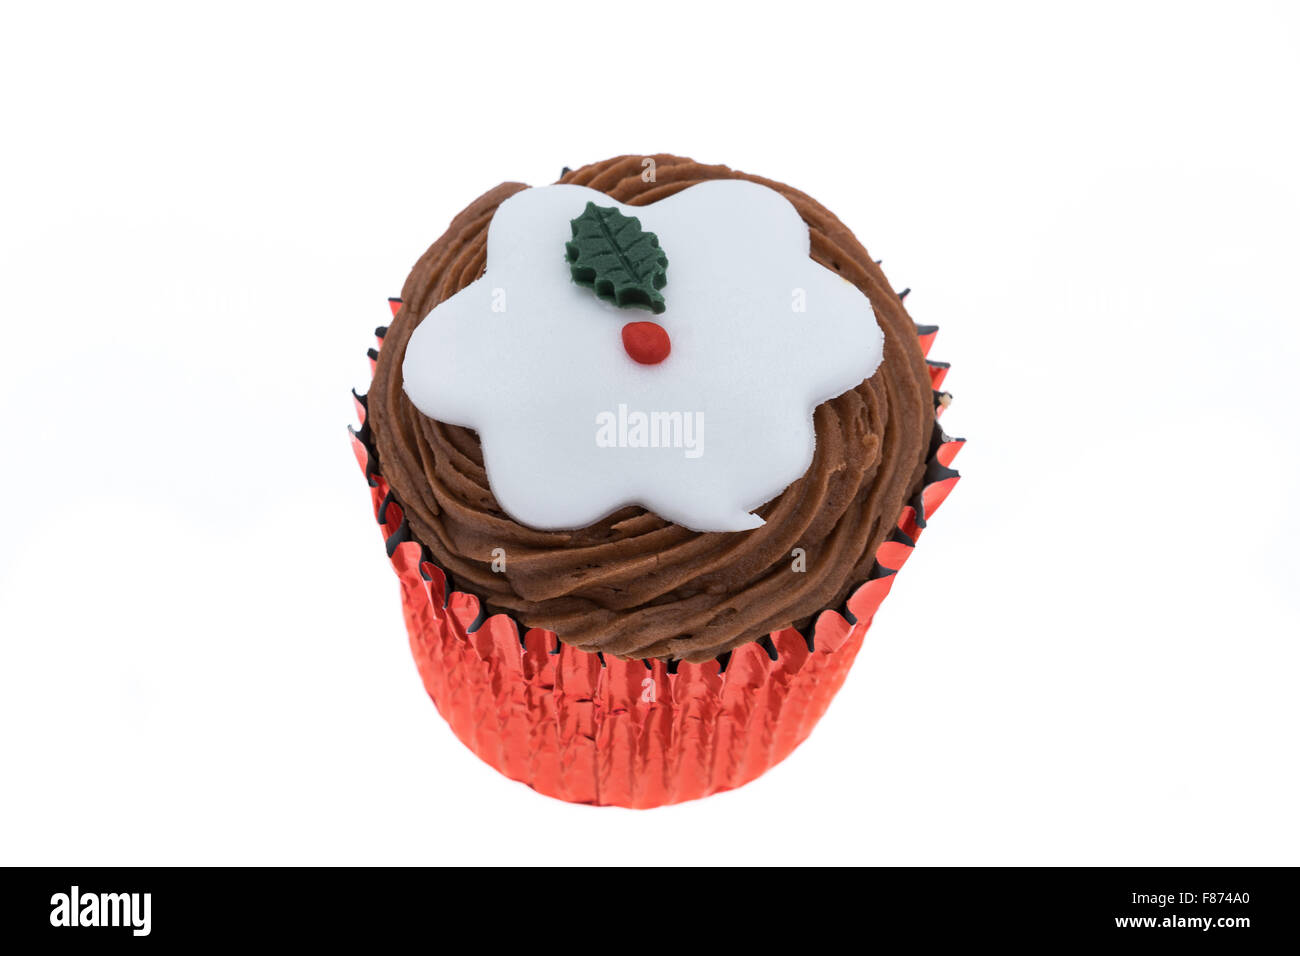 Cupcake with a decorated Christmas design of a Christmas pudding - studio shot with a white background Stock Photo